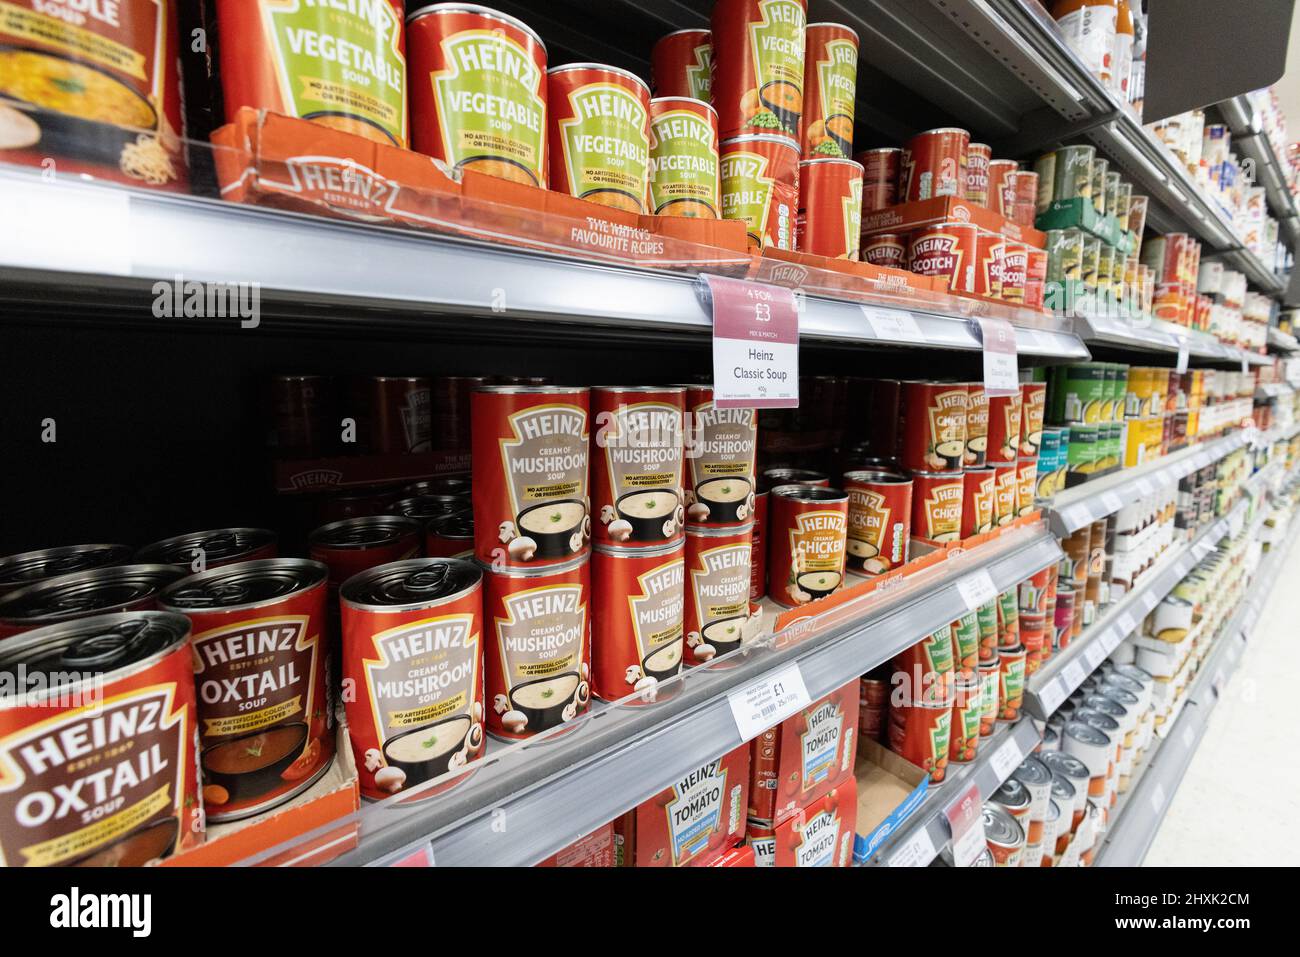 Heinz soups; Heinz soup tins on supermarket shelves for sale, UK, example of canned or tinned food. Stock Photo